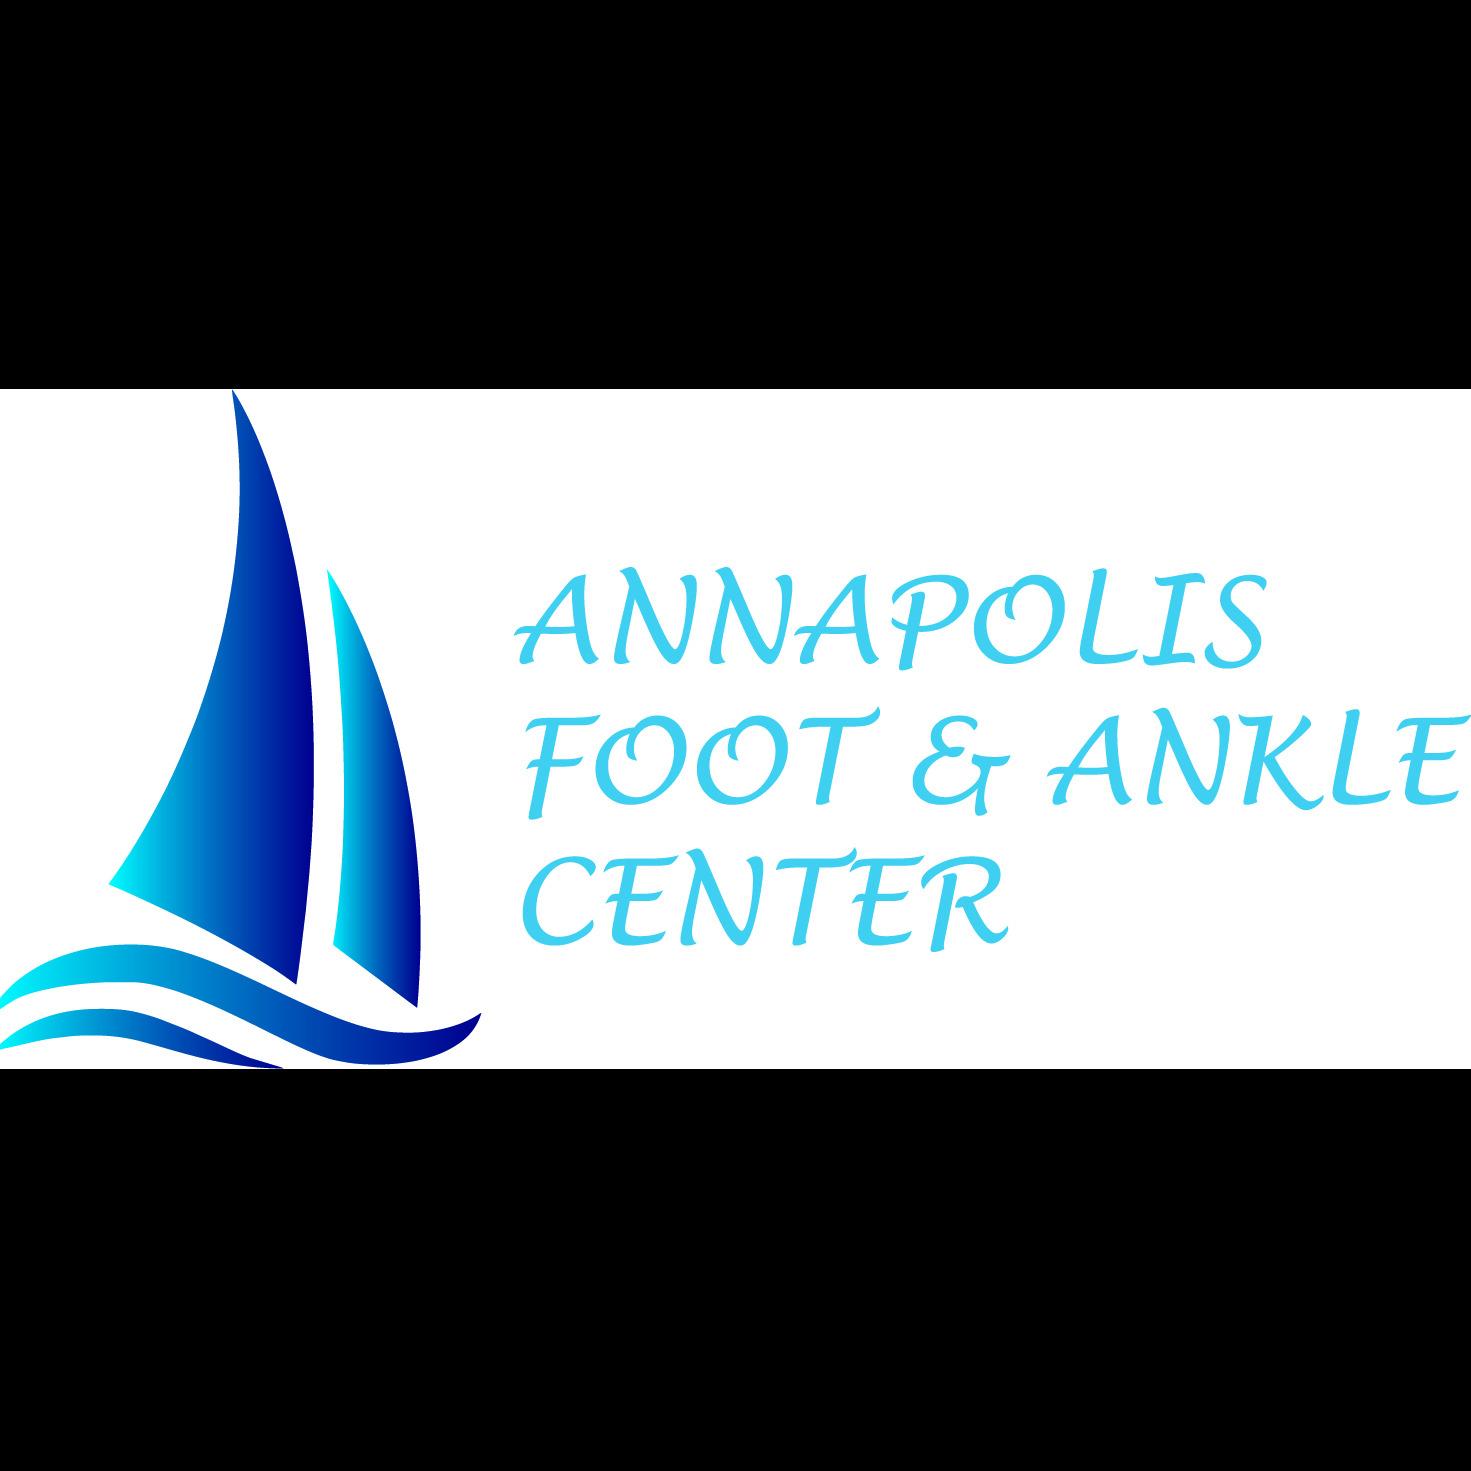 Annapolis Foot & Ankle Center